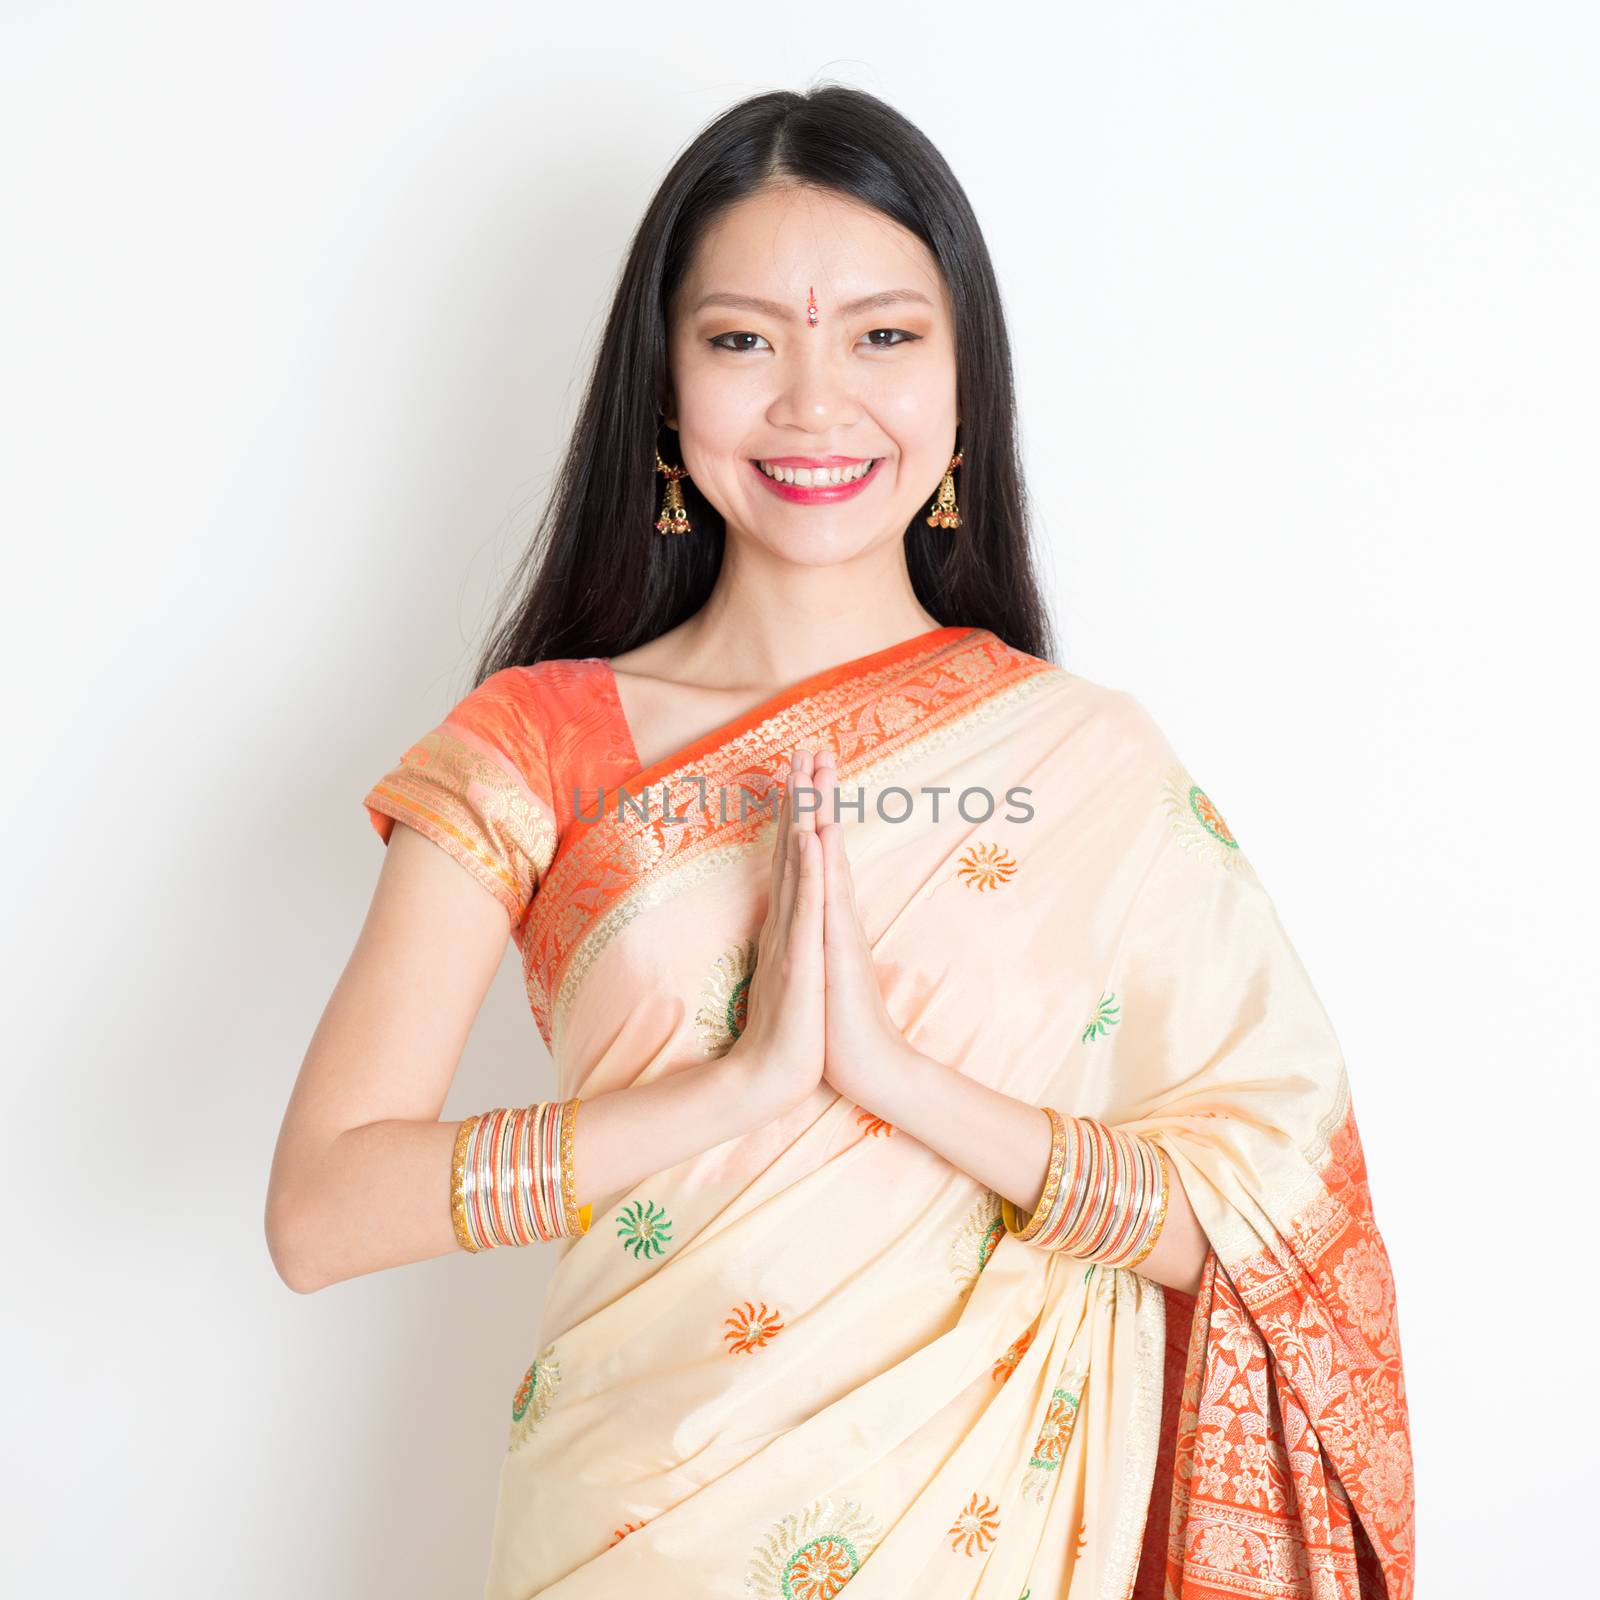 Portrait of mixed race Indian Chinese girl with traditional sari dress in greeting gesture, standing on plain background.